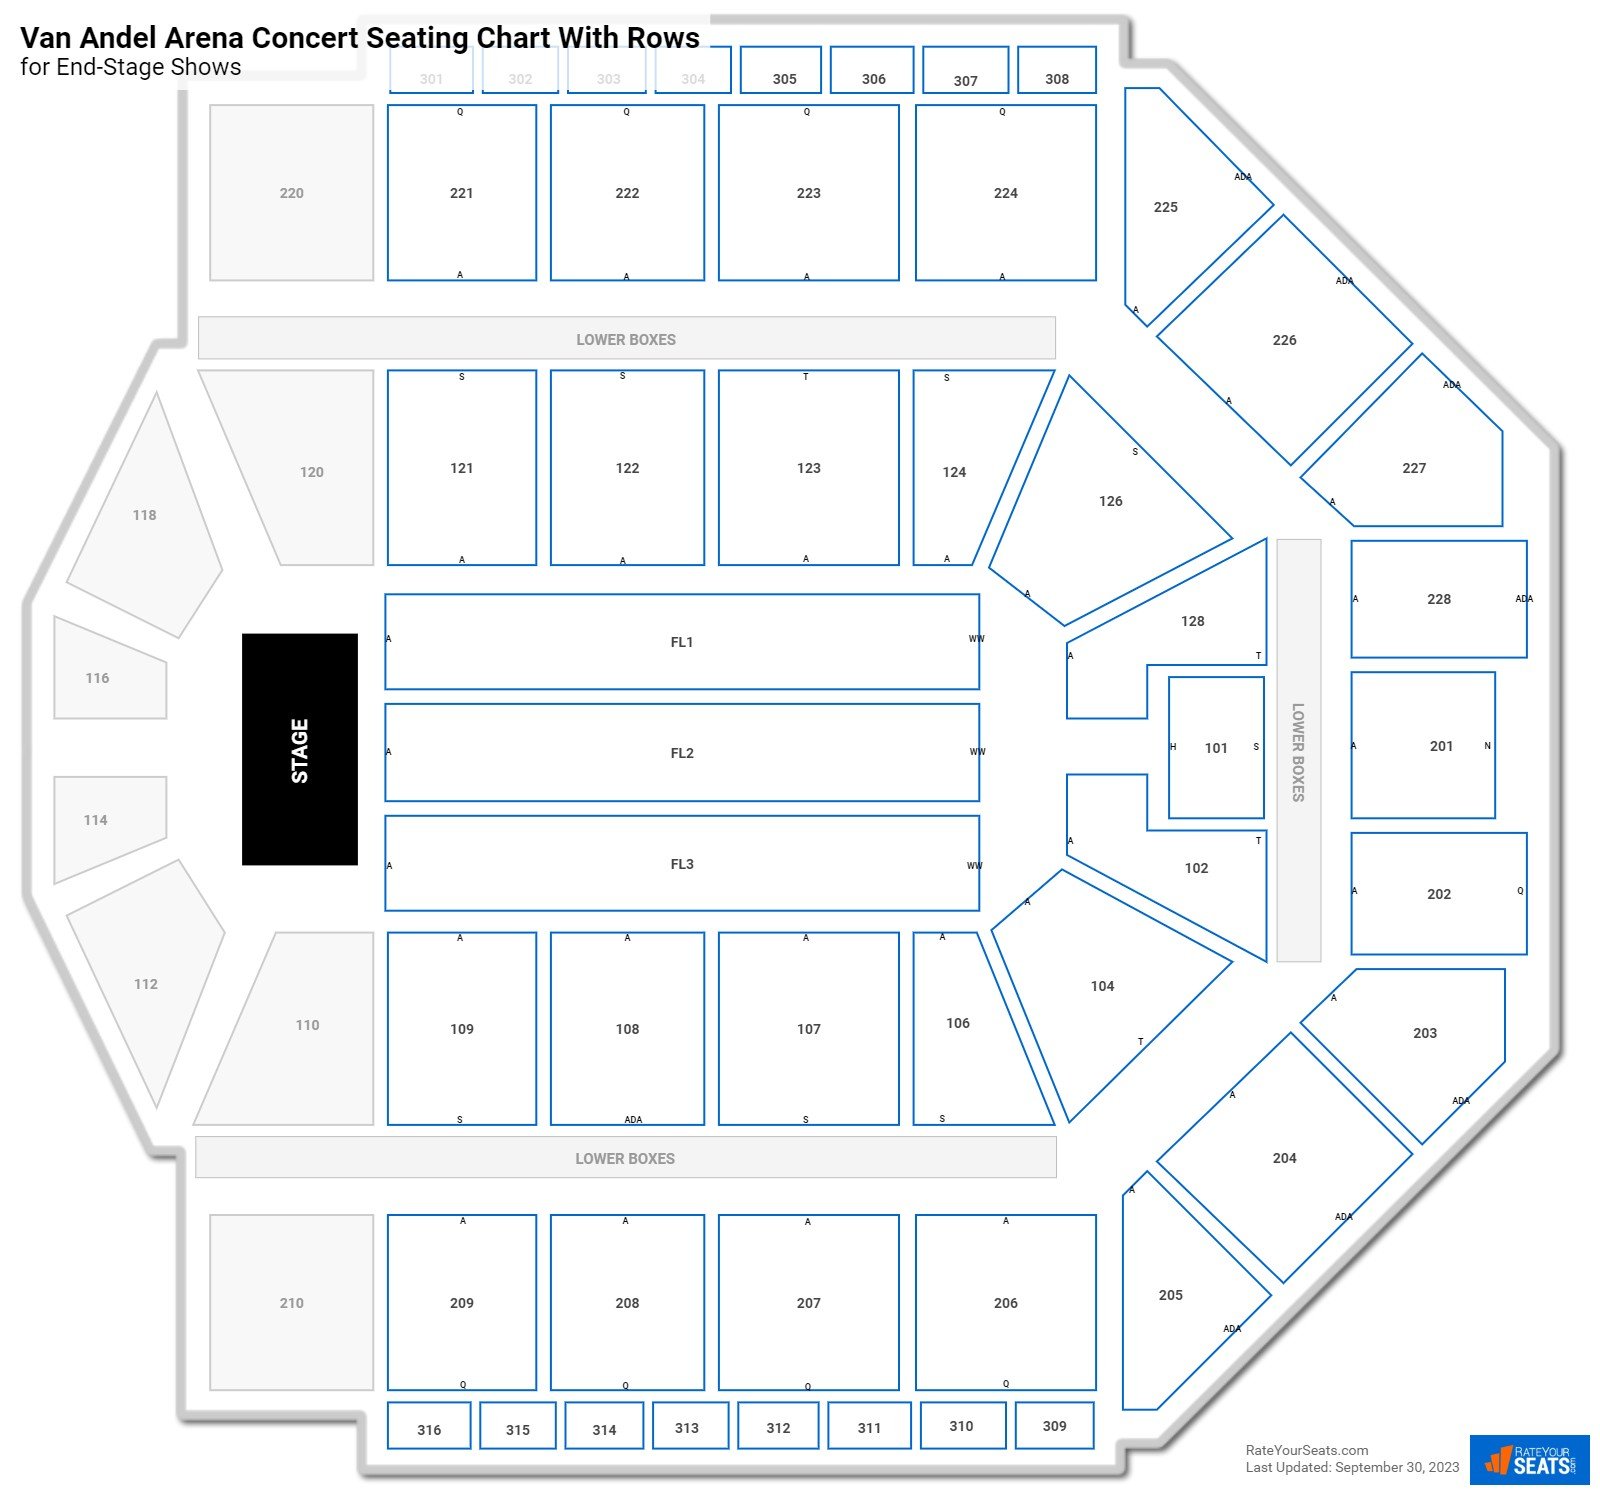 Van Andel Arena seating chart with row numbers